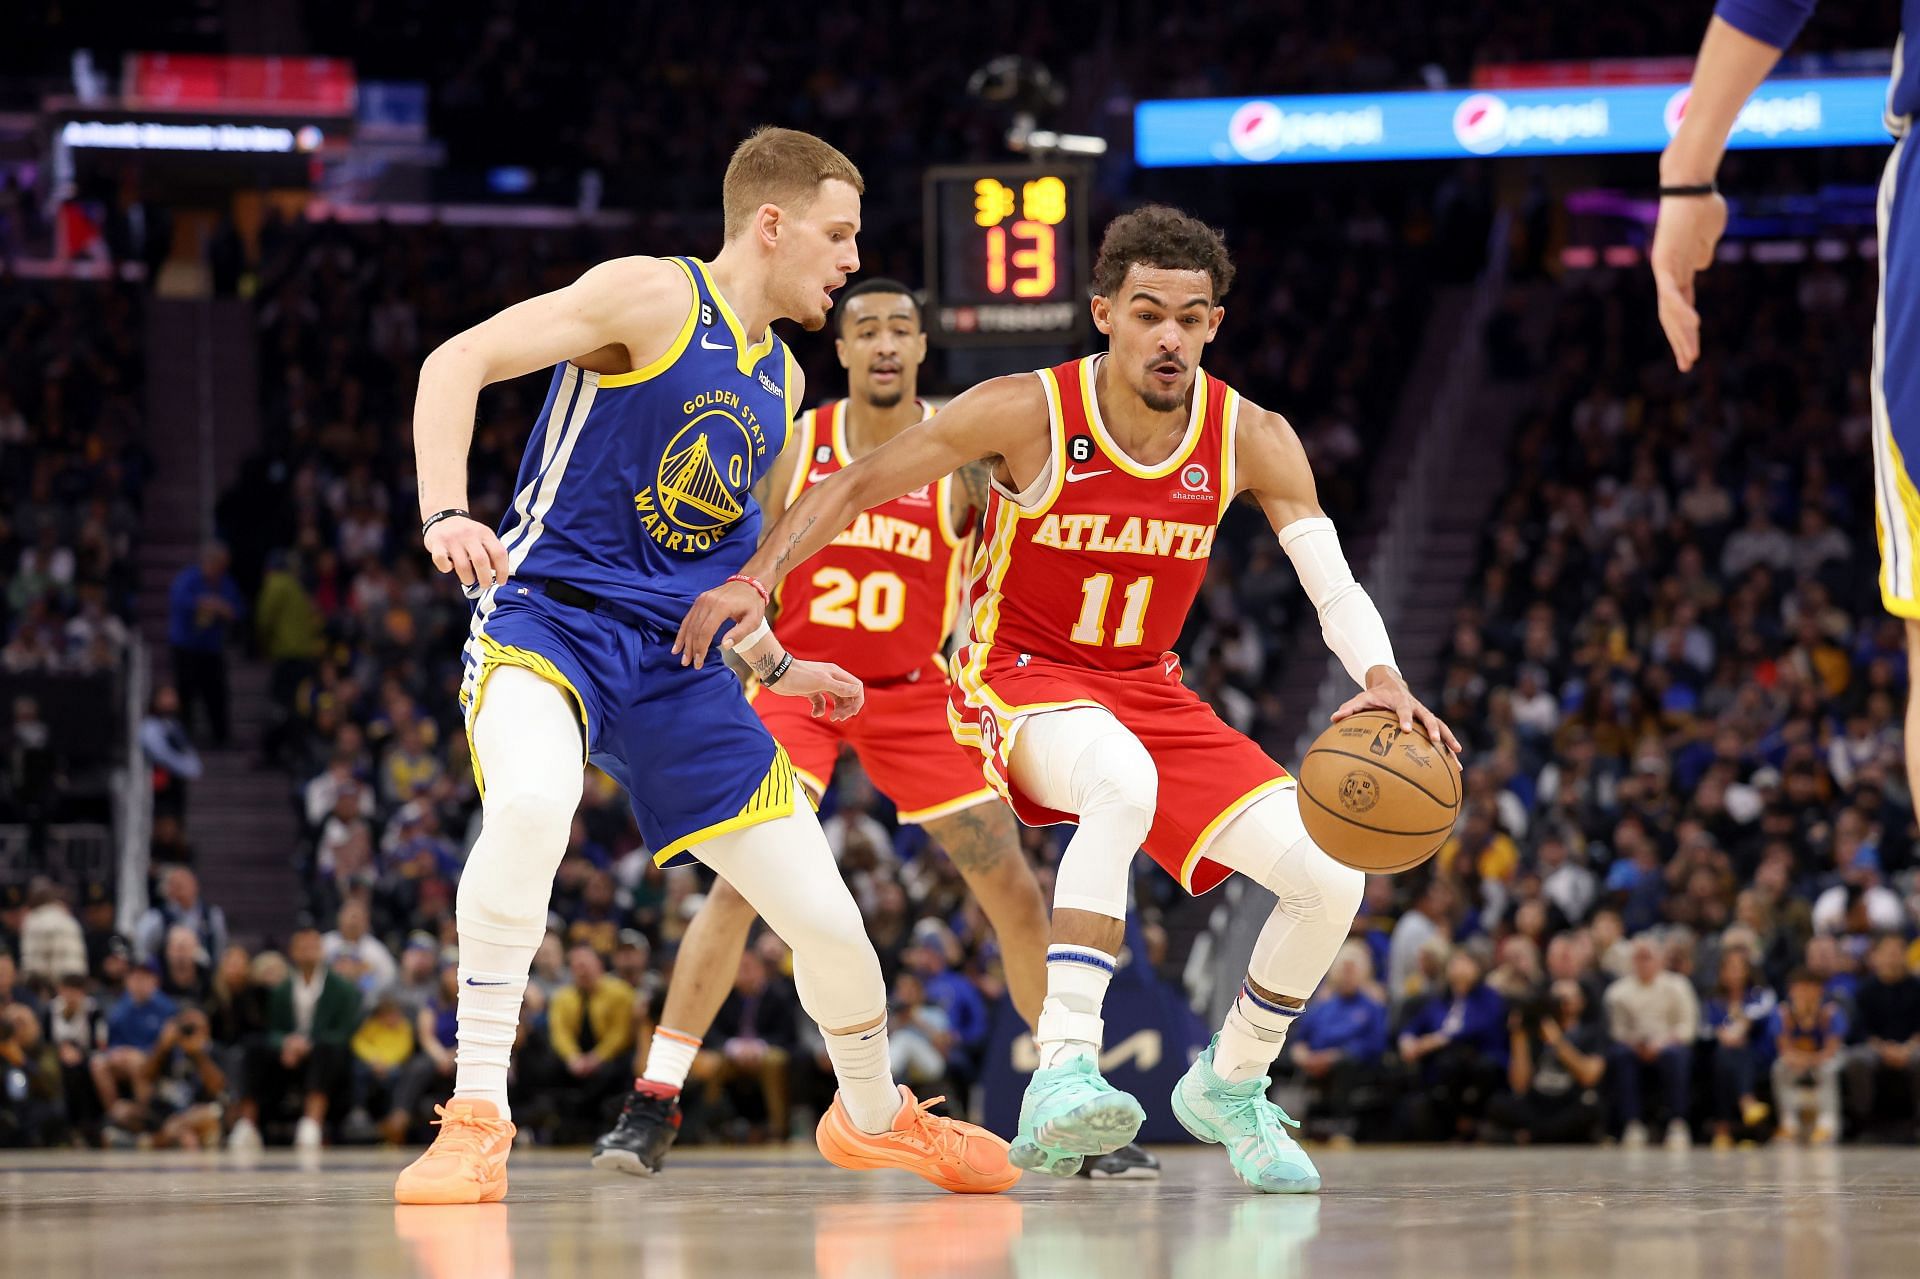 Golden State Warriors reserve guard Donte DiVincenzo defending Atlanta Hawks All-Star point guard Trae Young